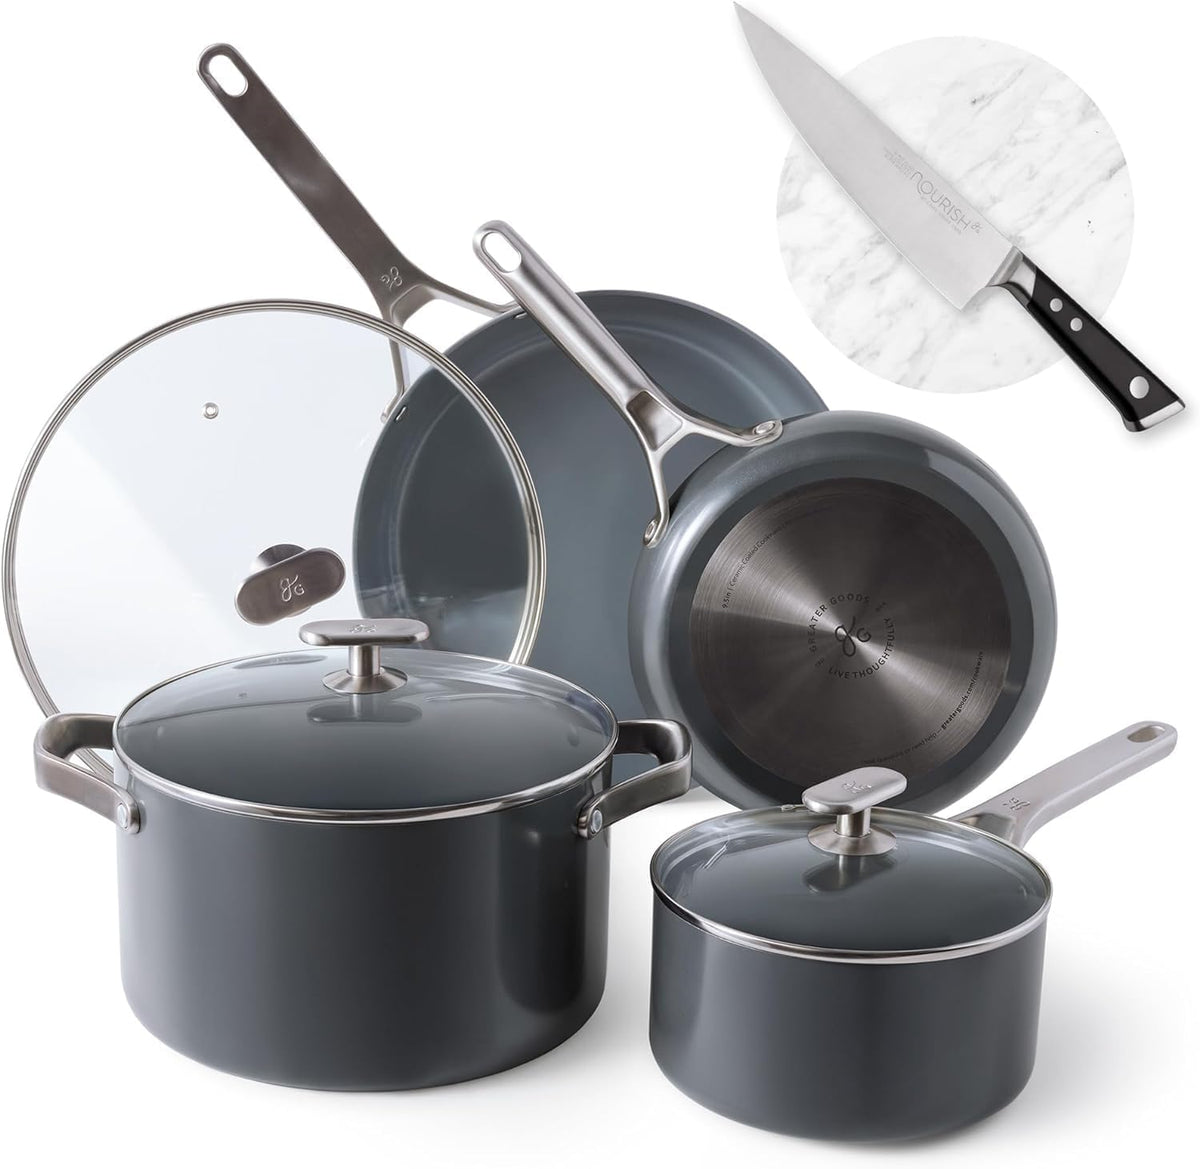 SavvyCeramic Nonstick Cookware Set (10pc) and Chef Knife (Stainless Steel), Midnight Gray